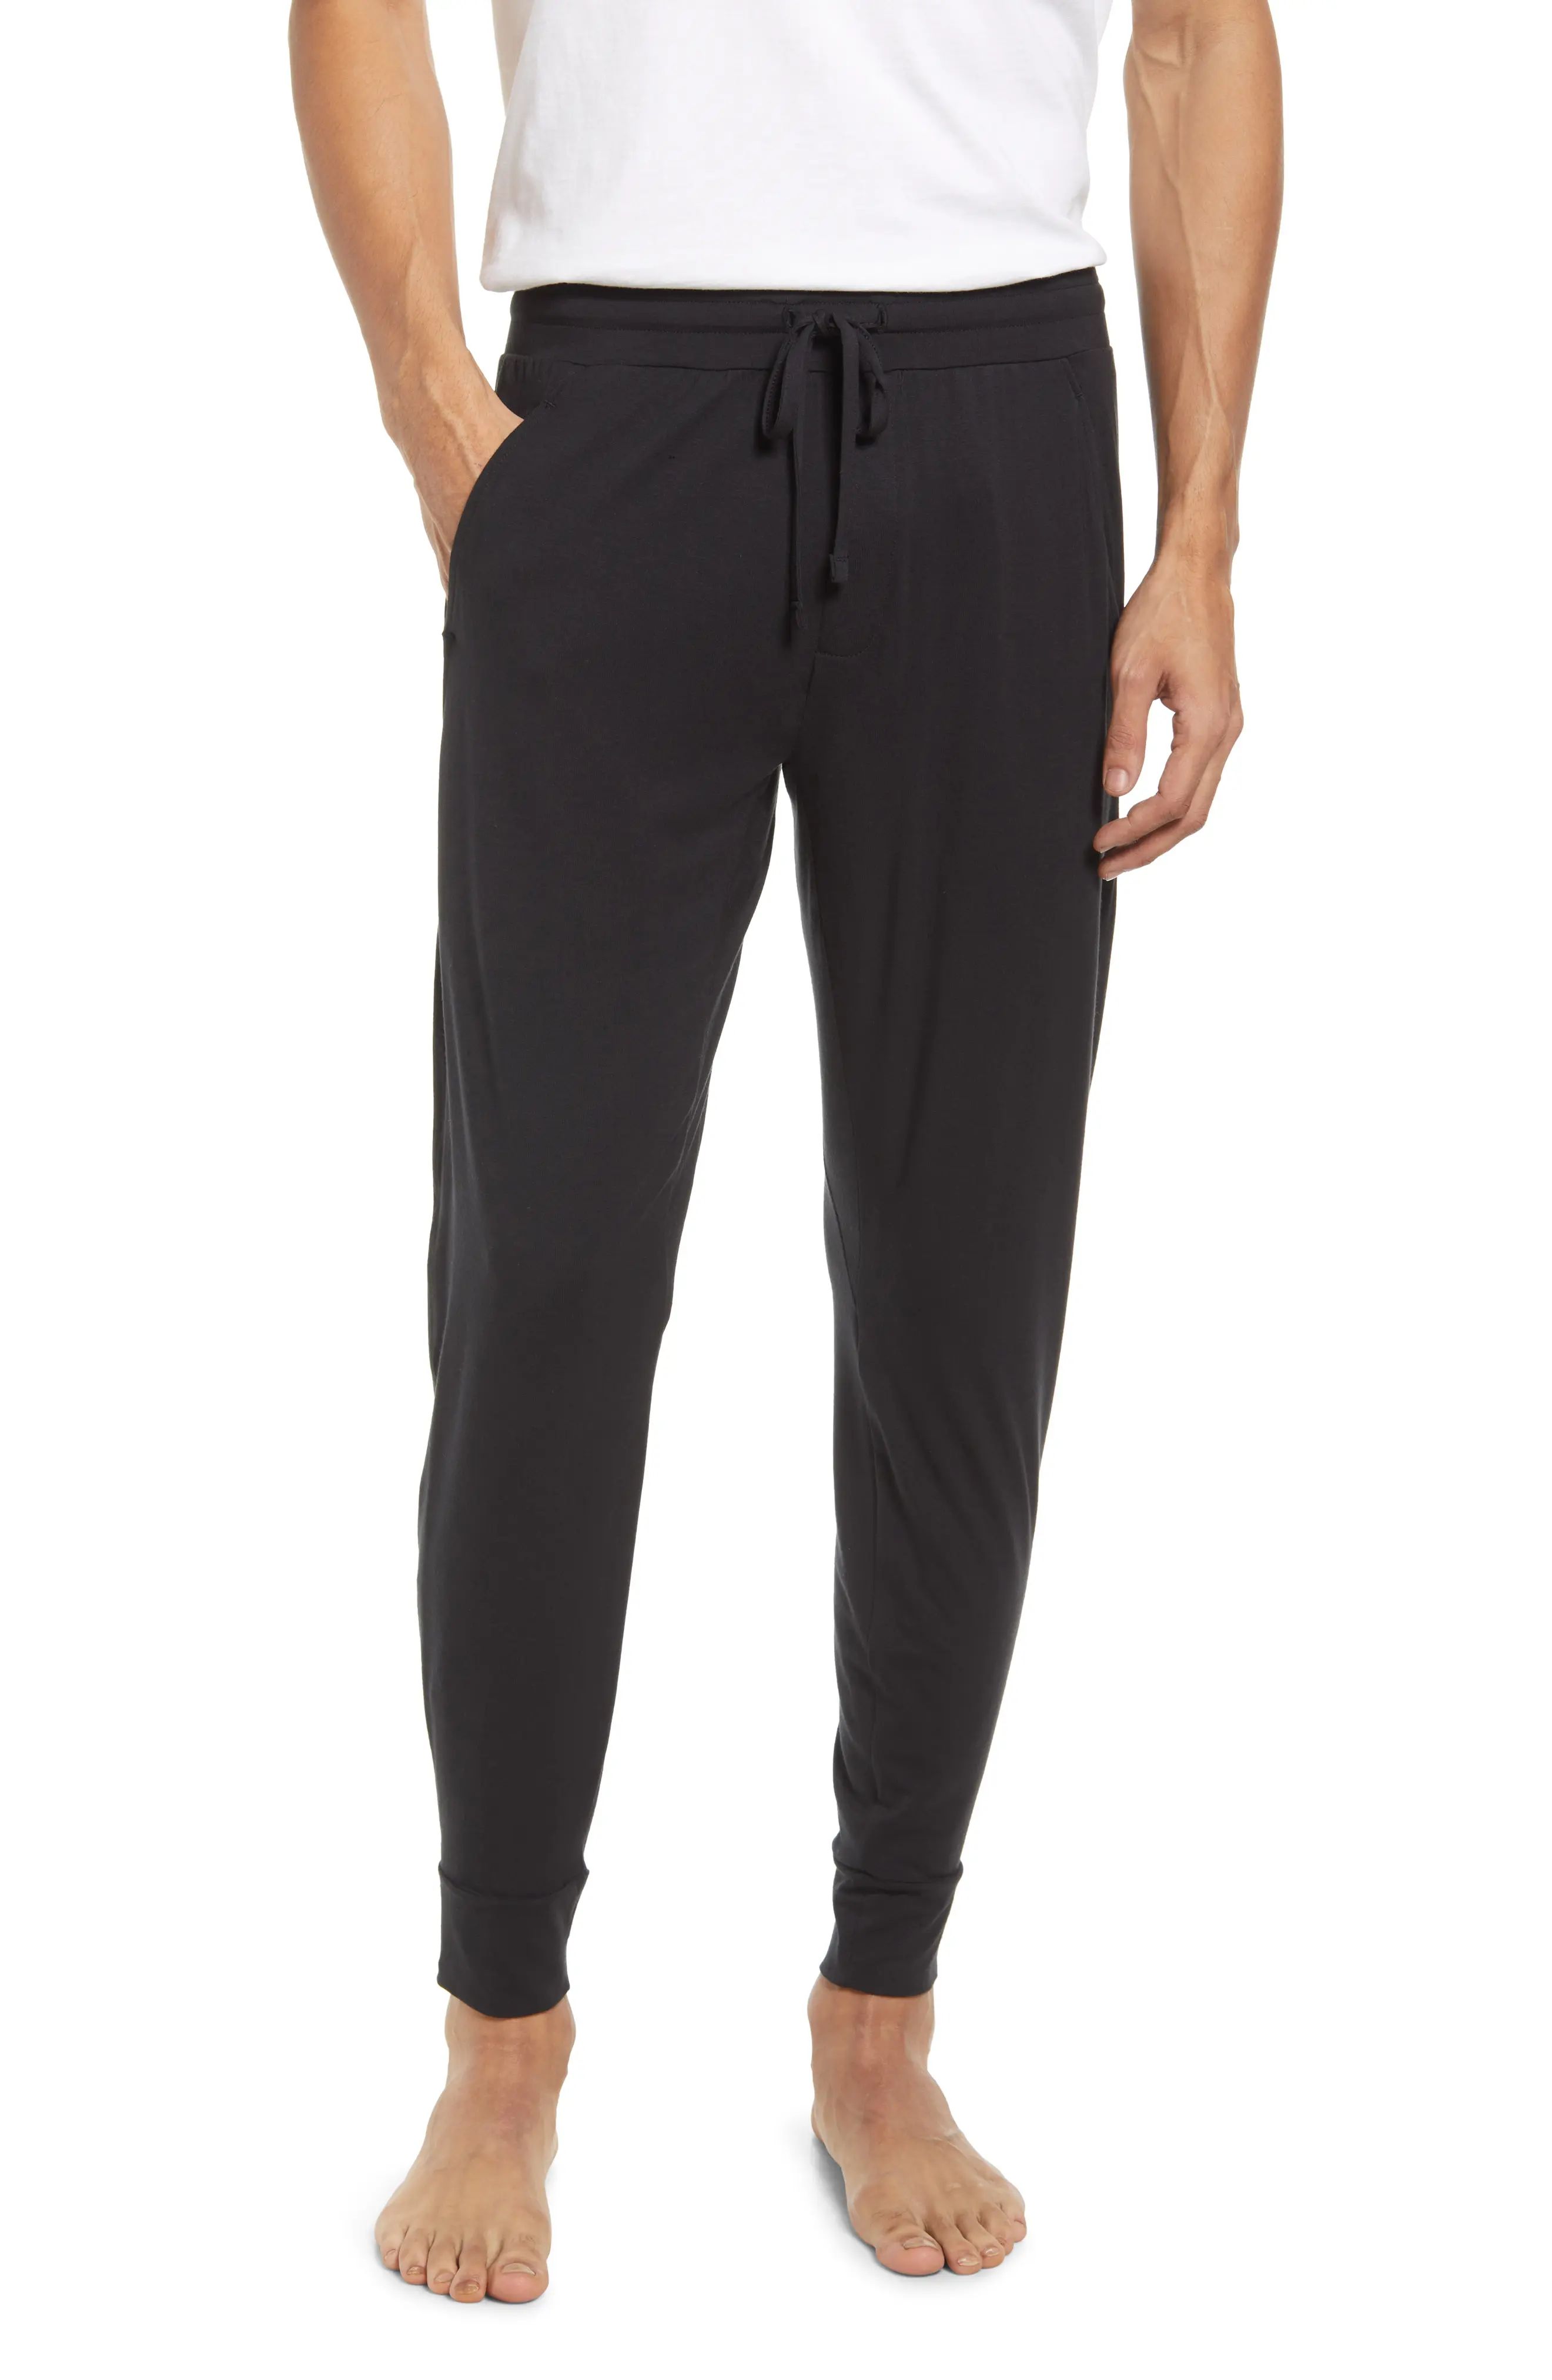 Tommy John Lounge Joggers in Black at Nordstrom, Size Medium | Nordstrom